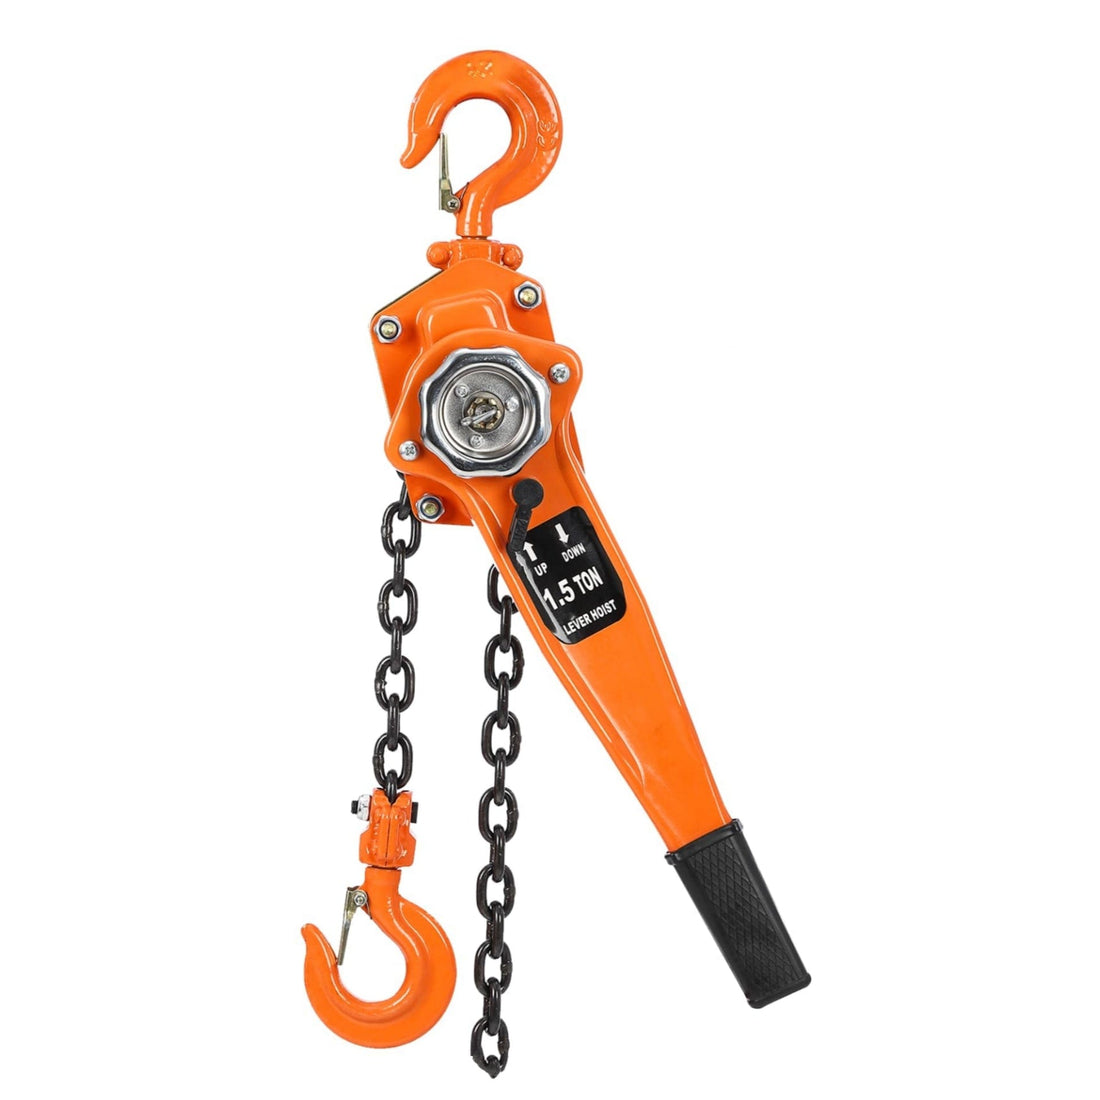 Manual Lever Chain Hoist 1.5 Ton 10 Ft Lift Lever Hoist Come Along,  with Double-Pawl Brake